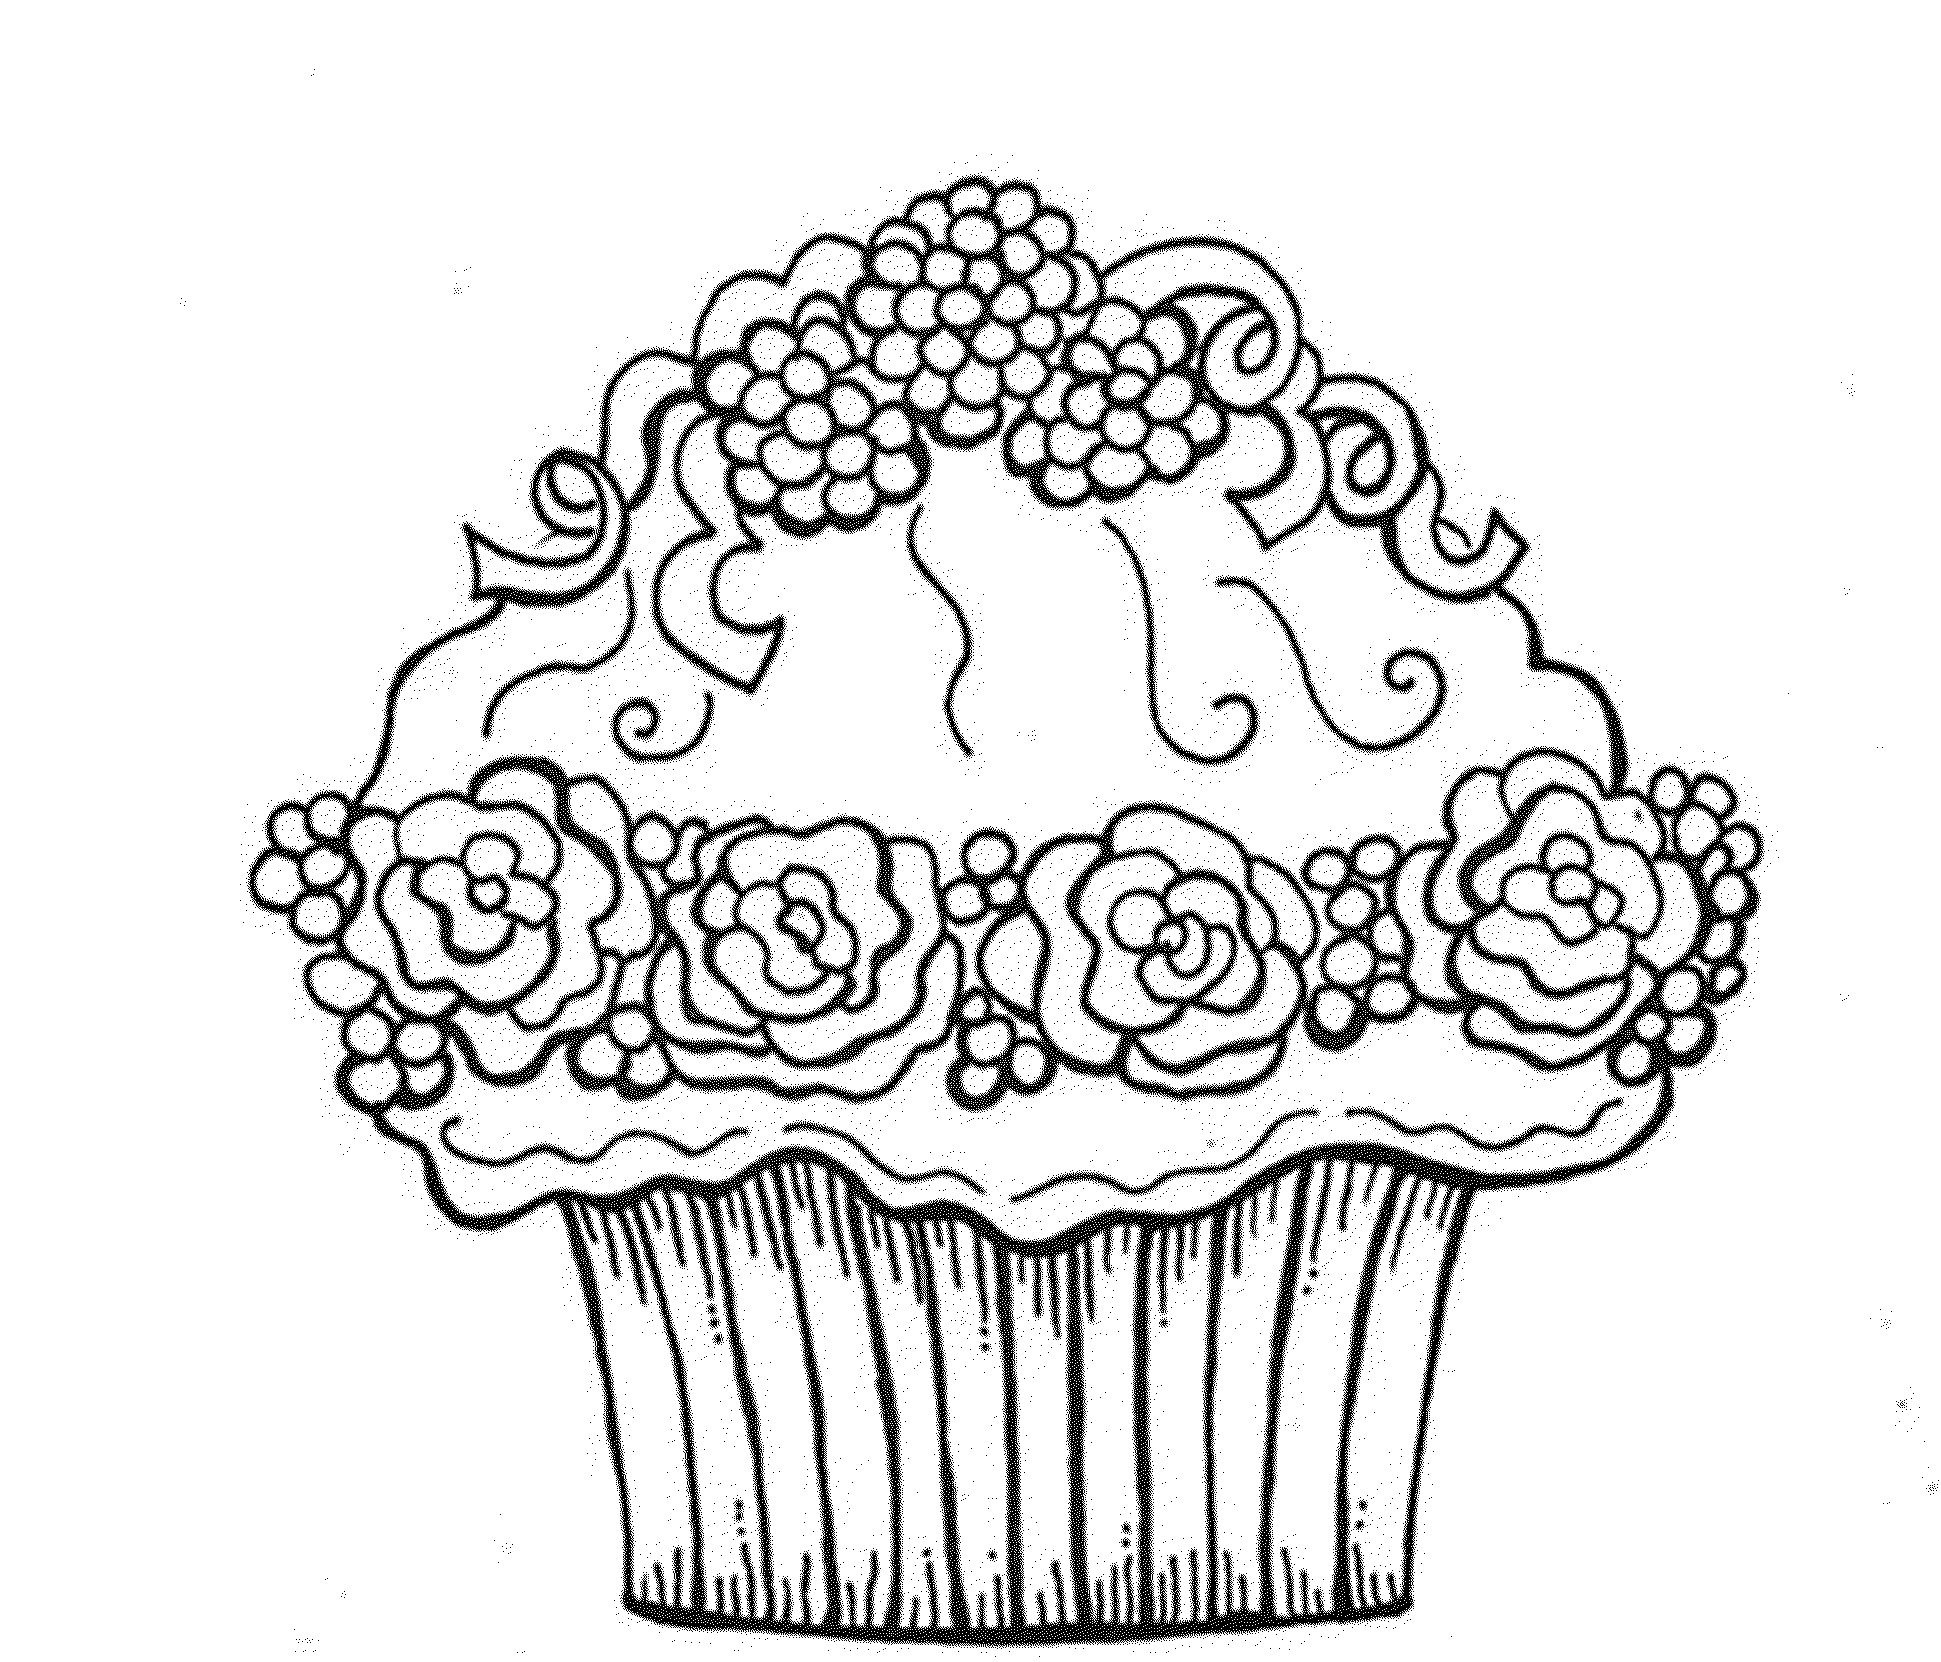 Cupcake Coloring Pages Free Coloring Home